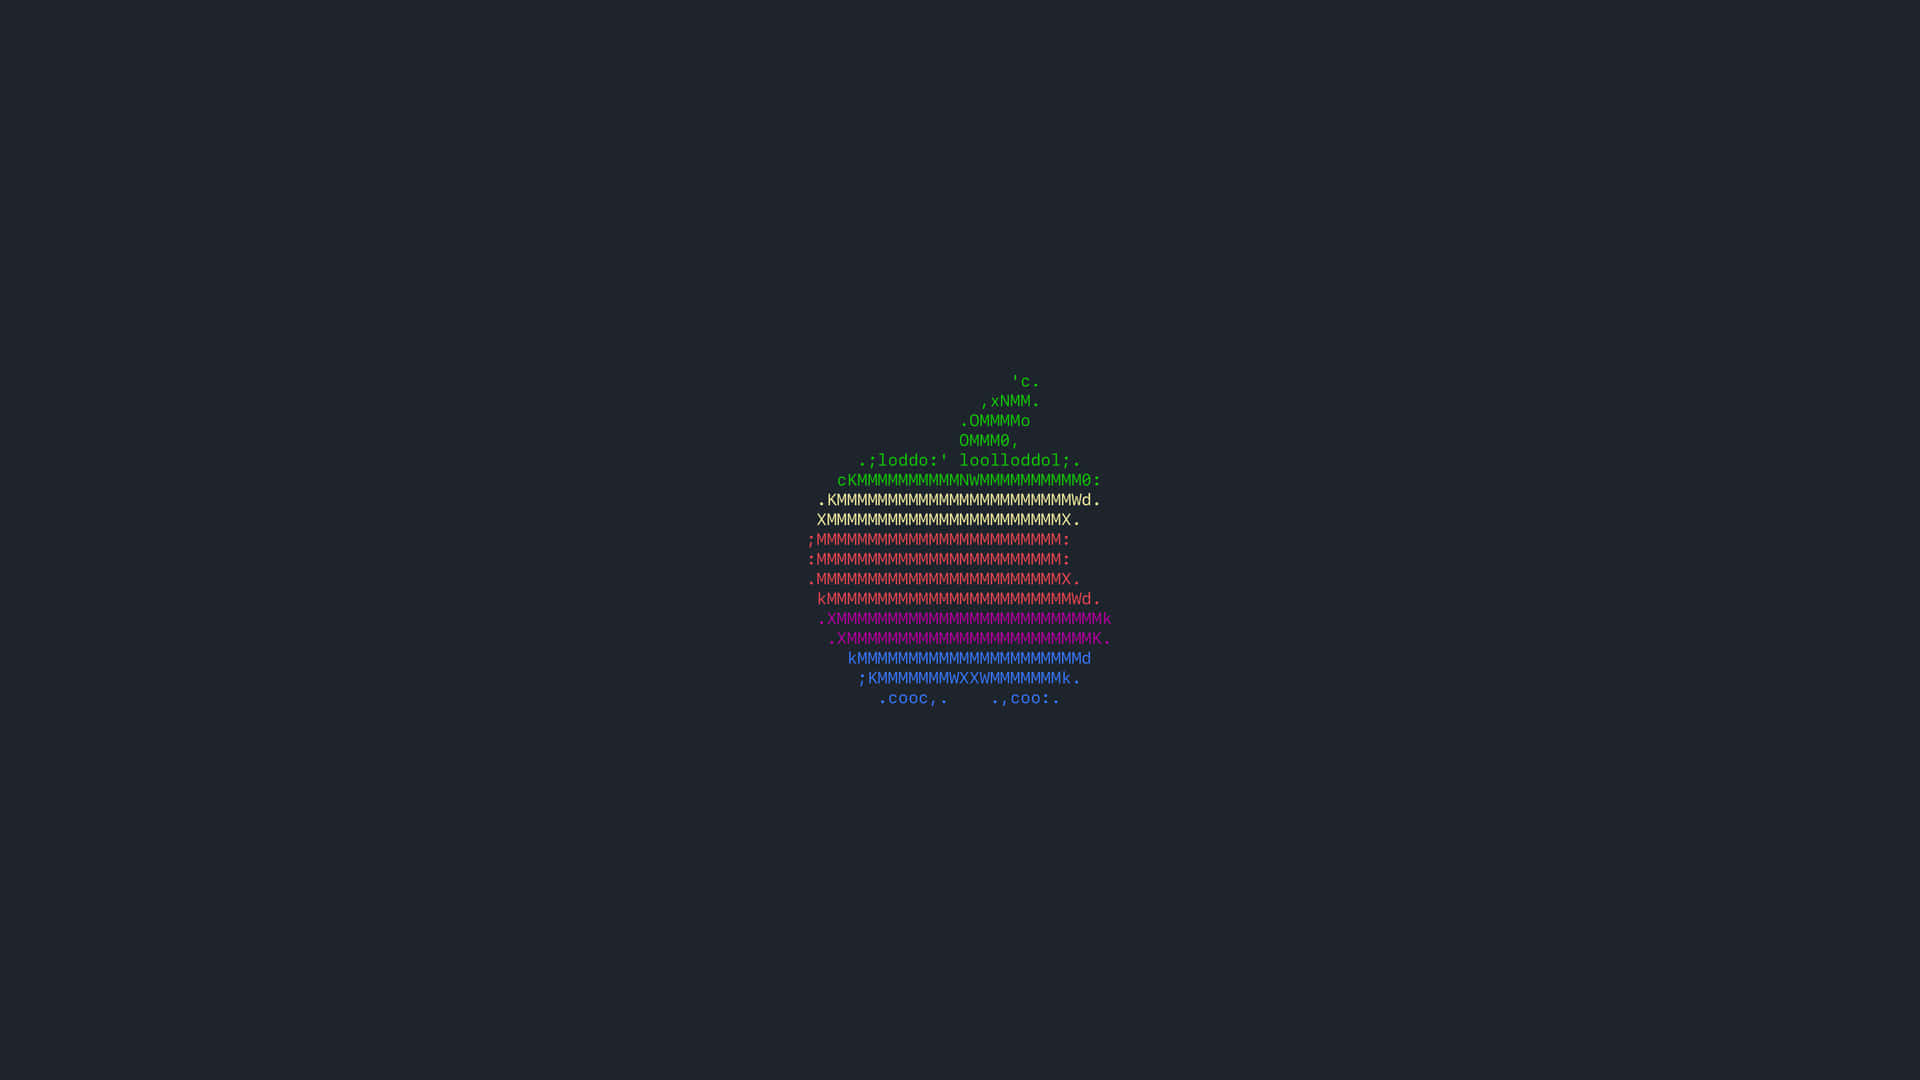 A Crystal Clear View of a Slice of Apple Wallpaper